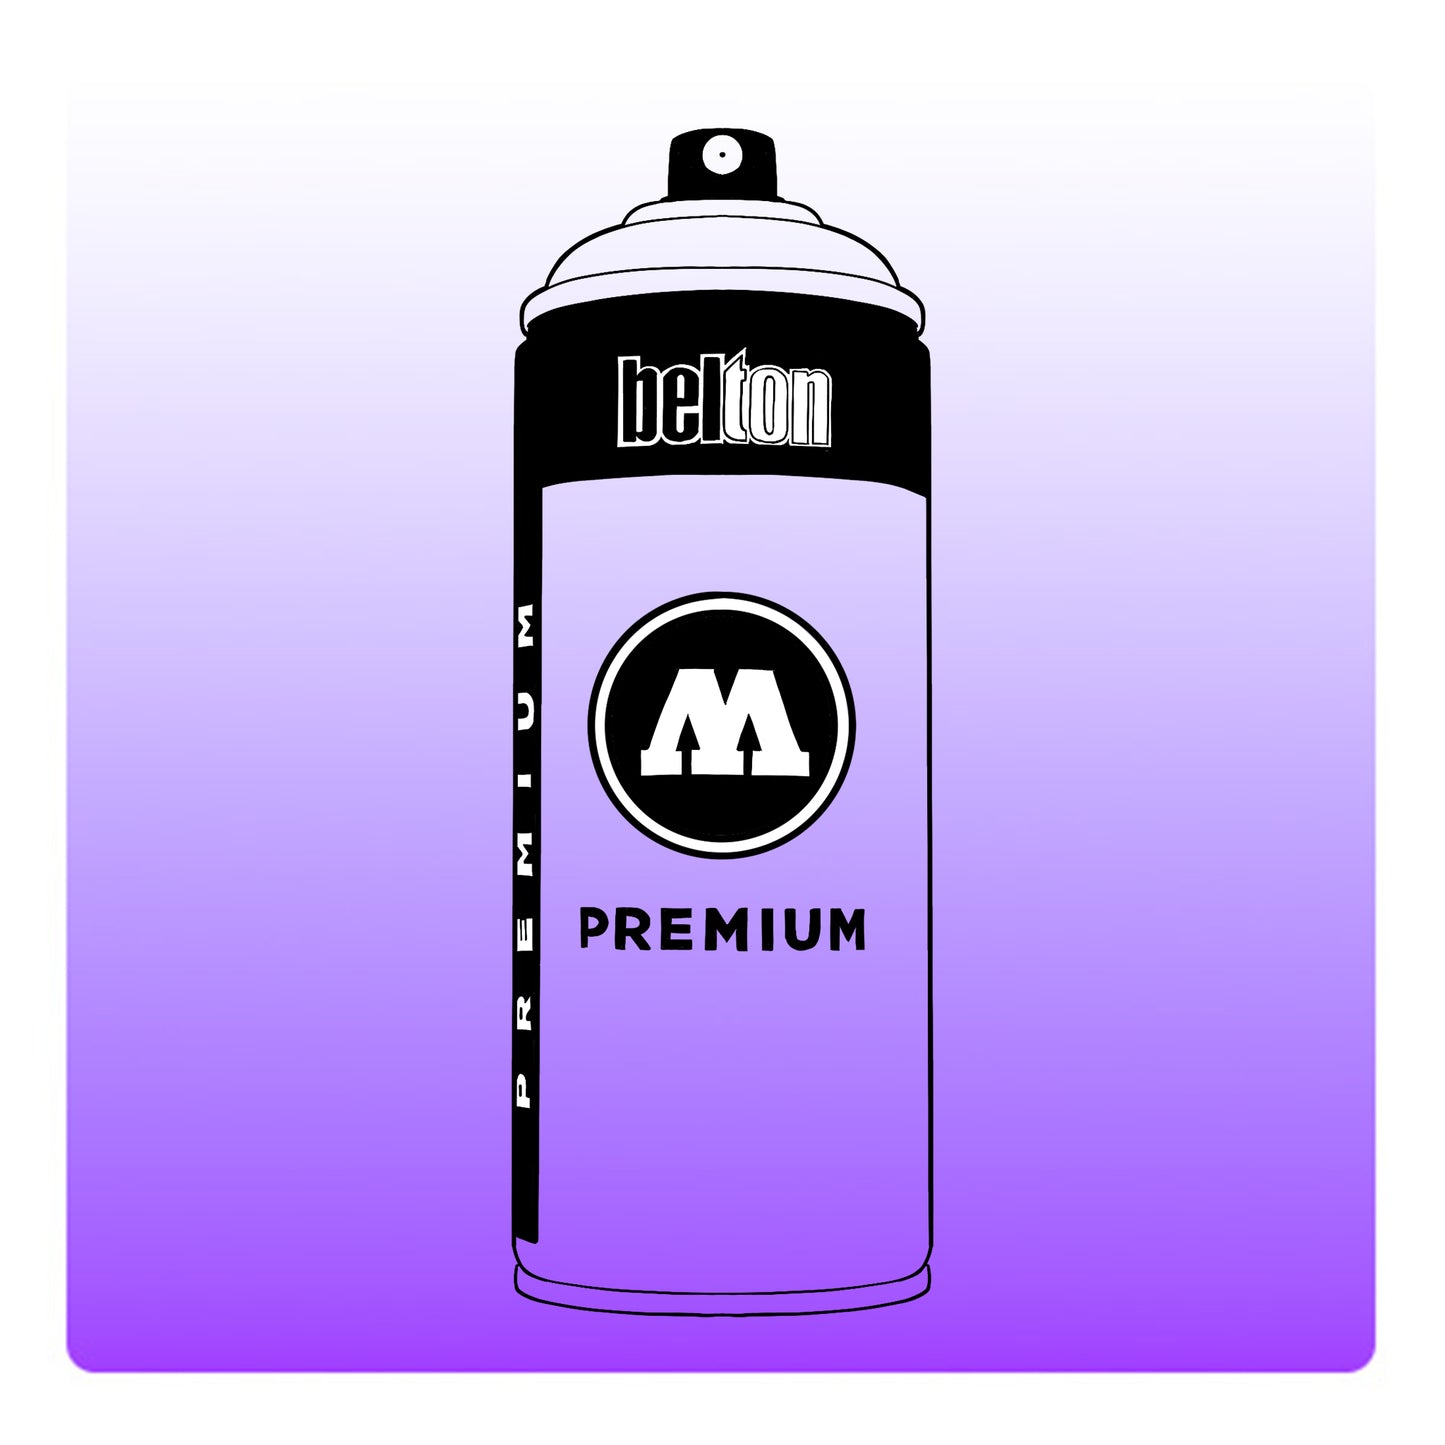 A line drawing of a spray paint can with a transparent, purple color swatch.